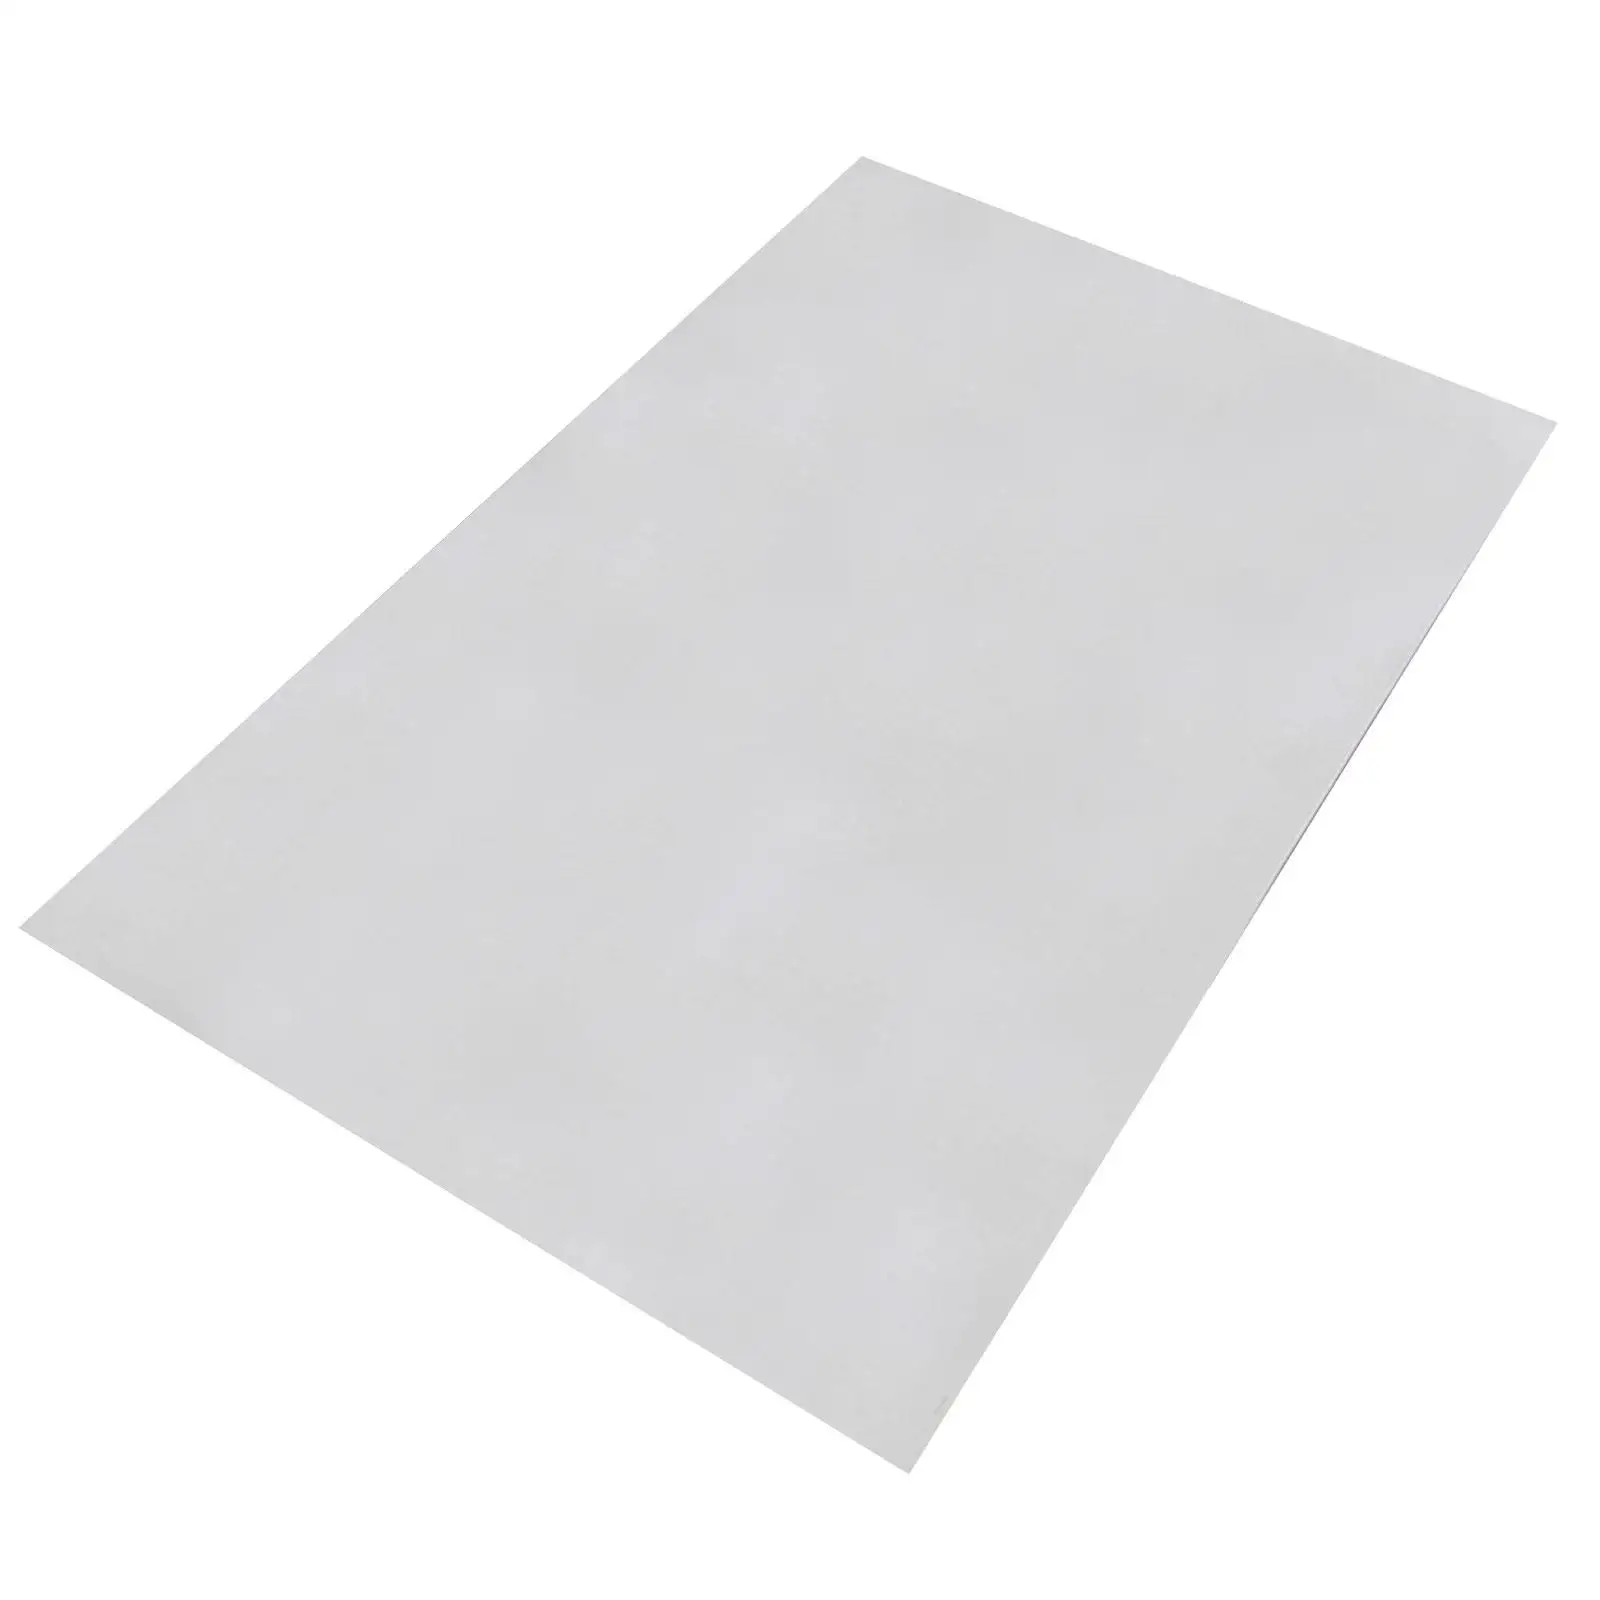 Office desk pads 0.08inch Thick Table Cover for Countertop Writing Desktops